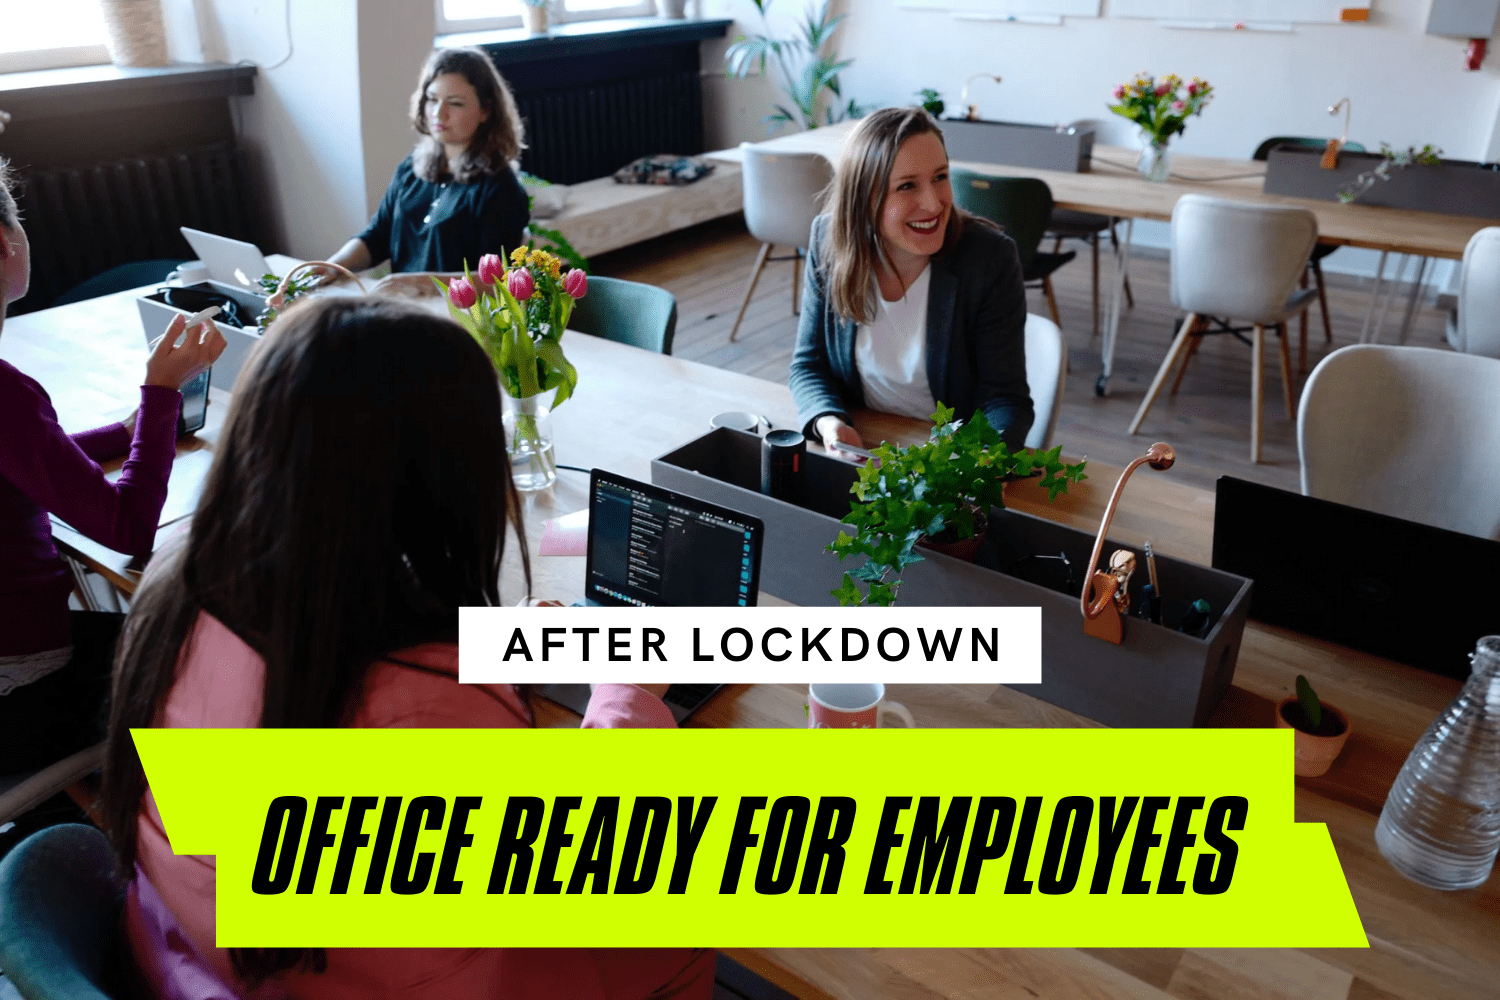 How To Get Your London Office Ready For Employees Upon Returning After Lockdown